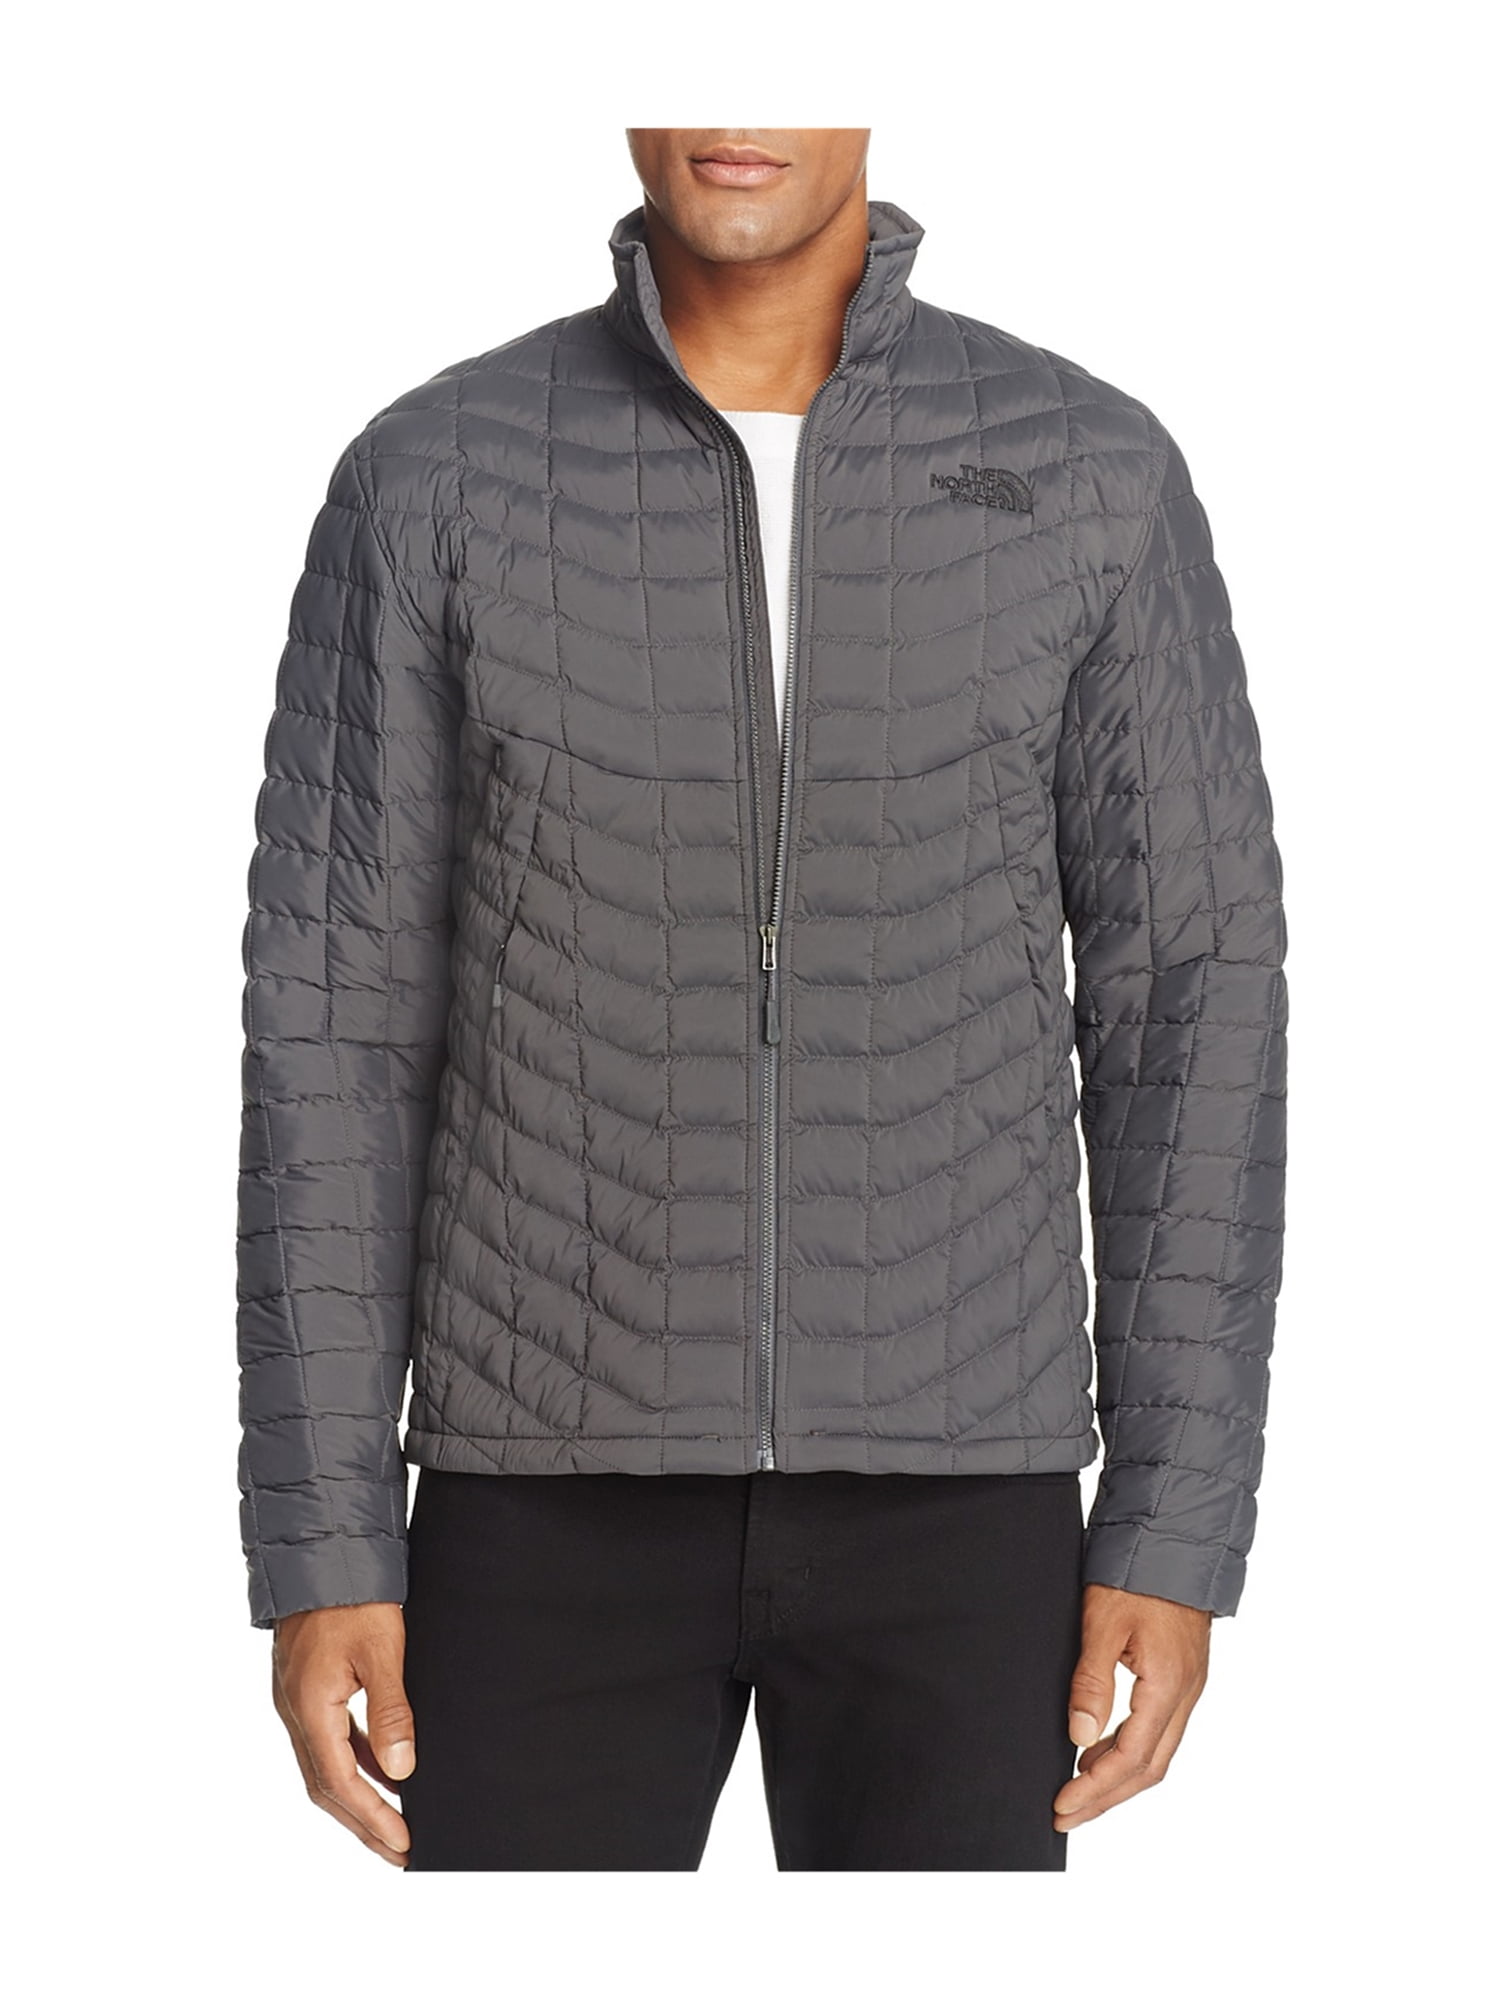 north face quilted jacket men